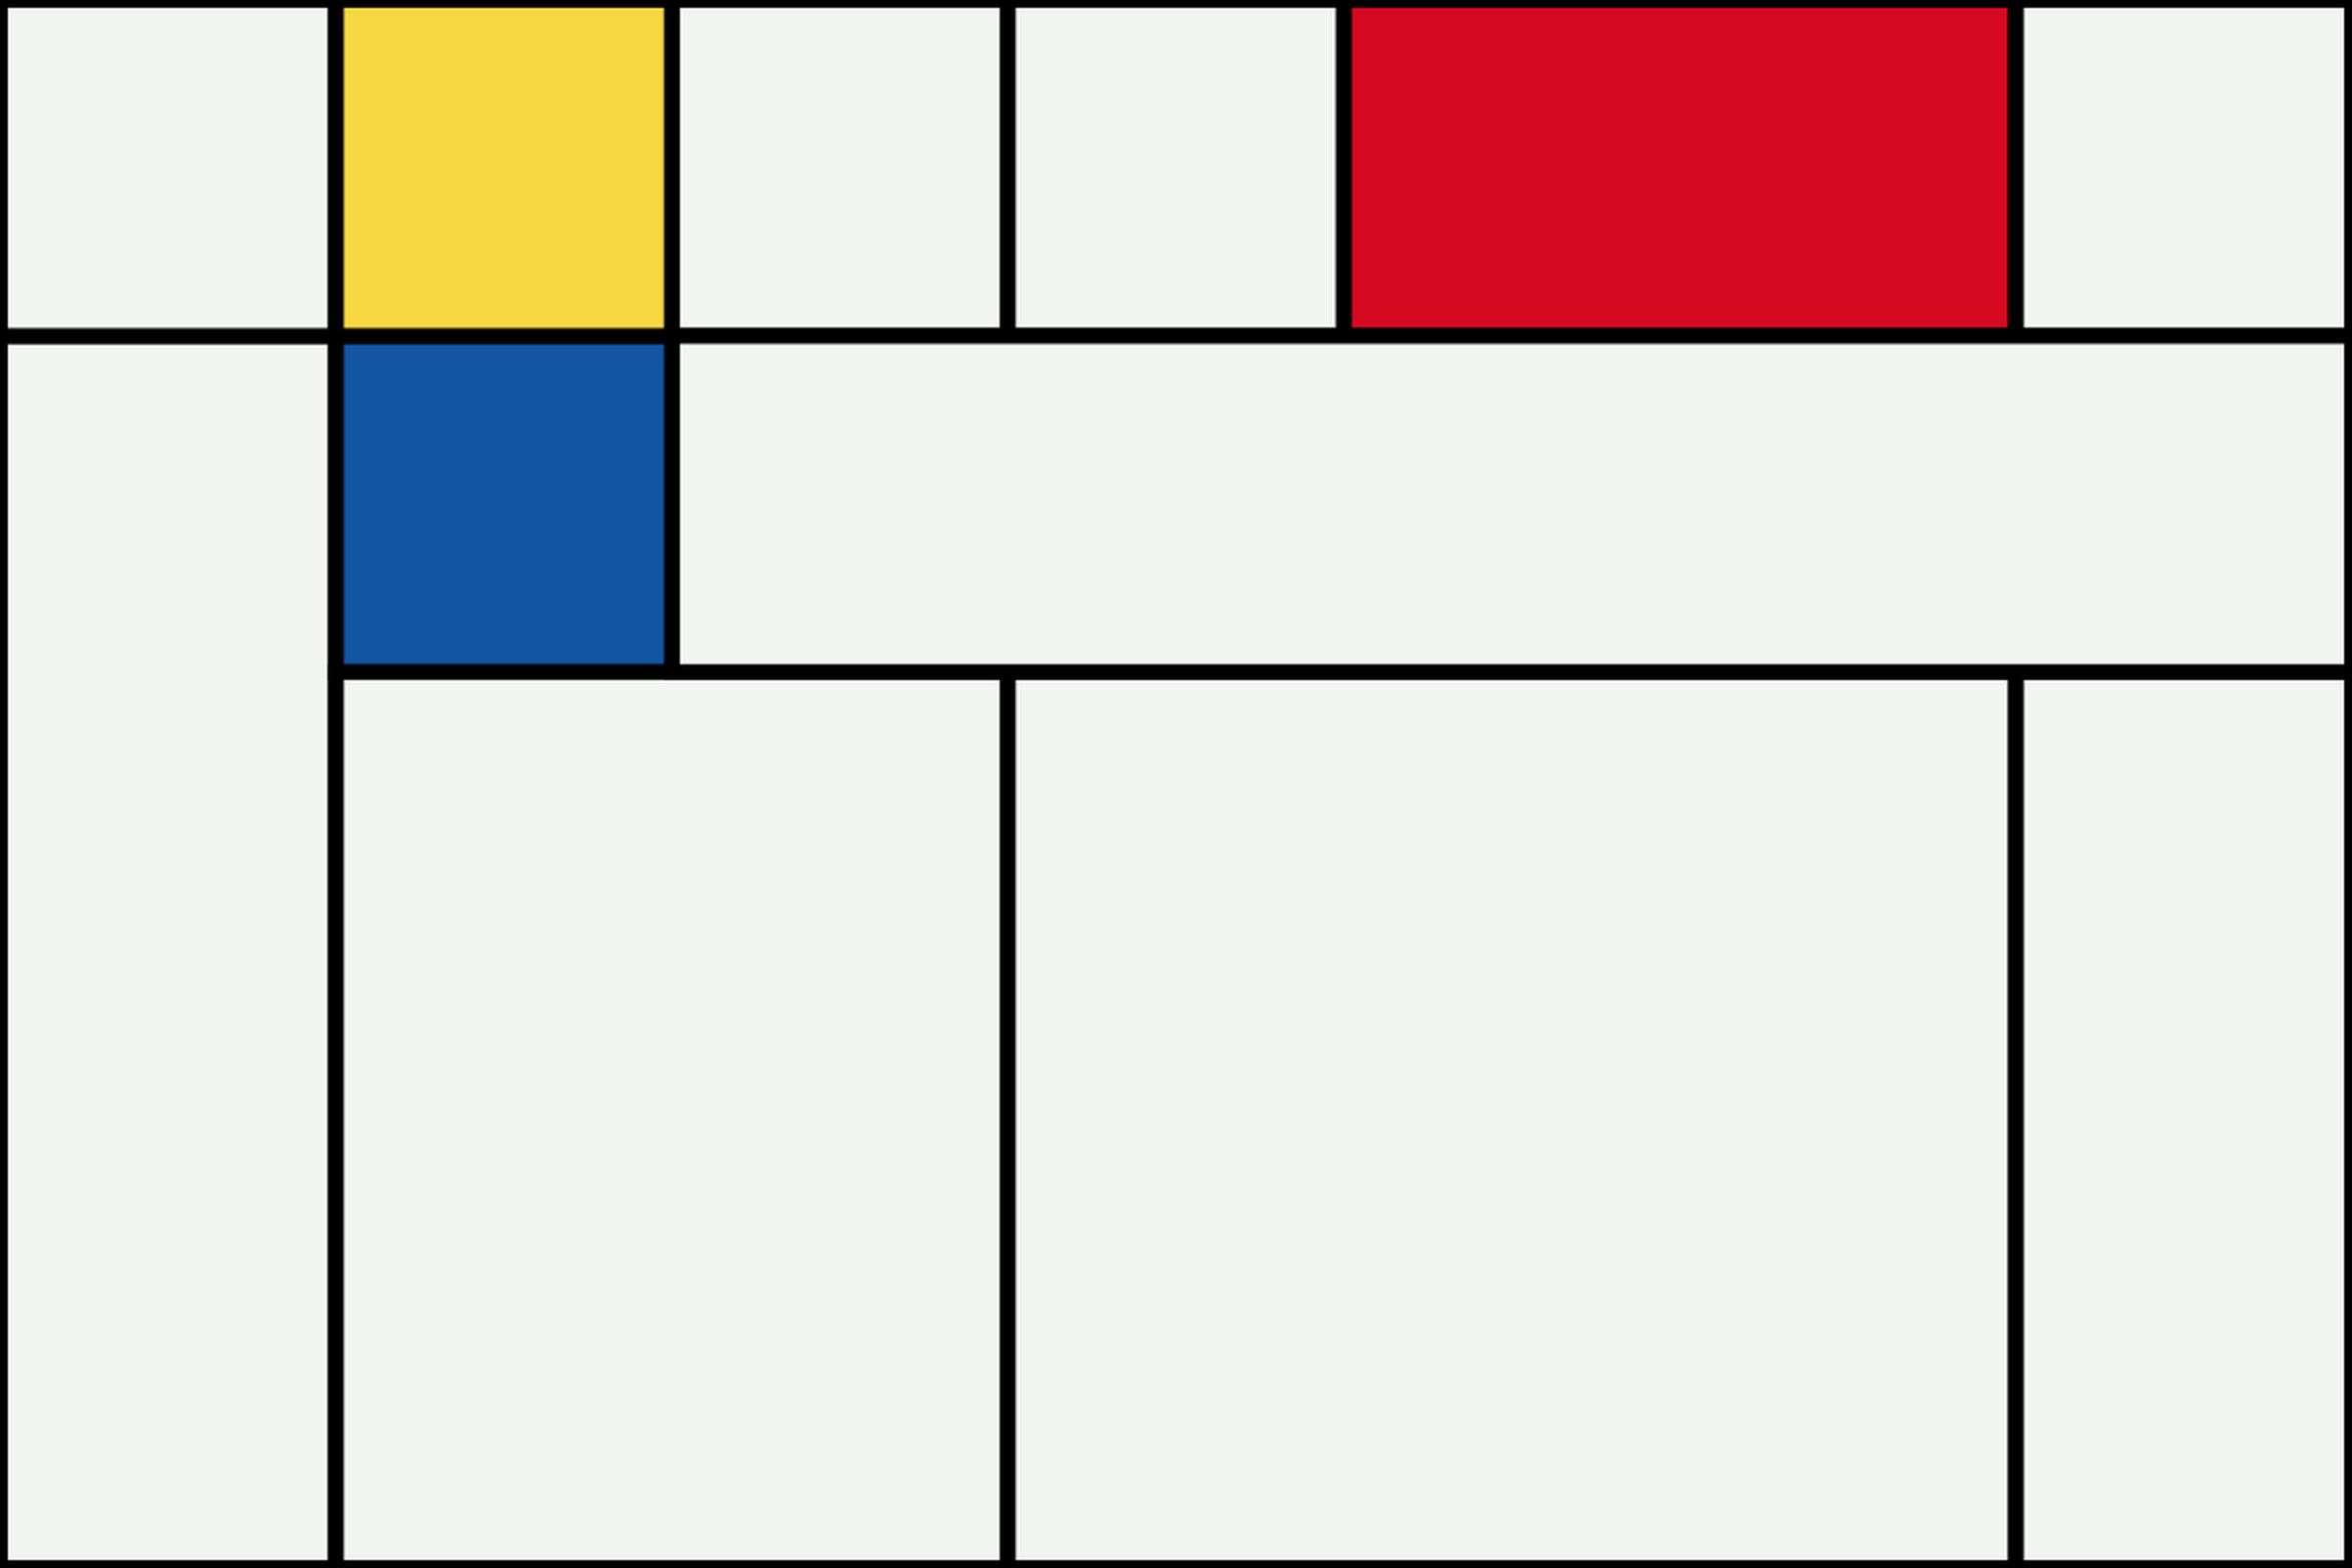 The tool can be used to generate art in various styles, including the abstract artist Piet Mondrian.